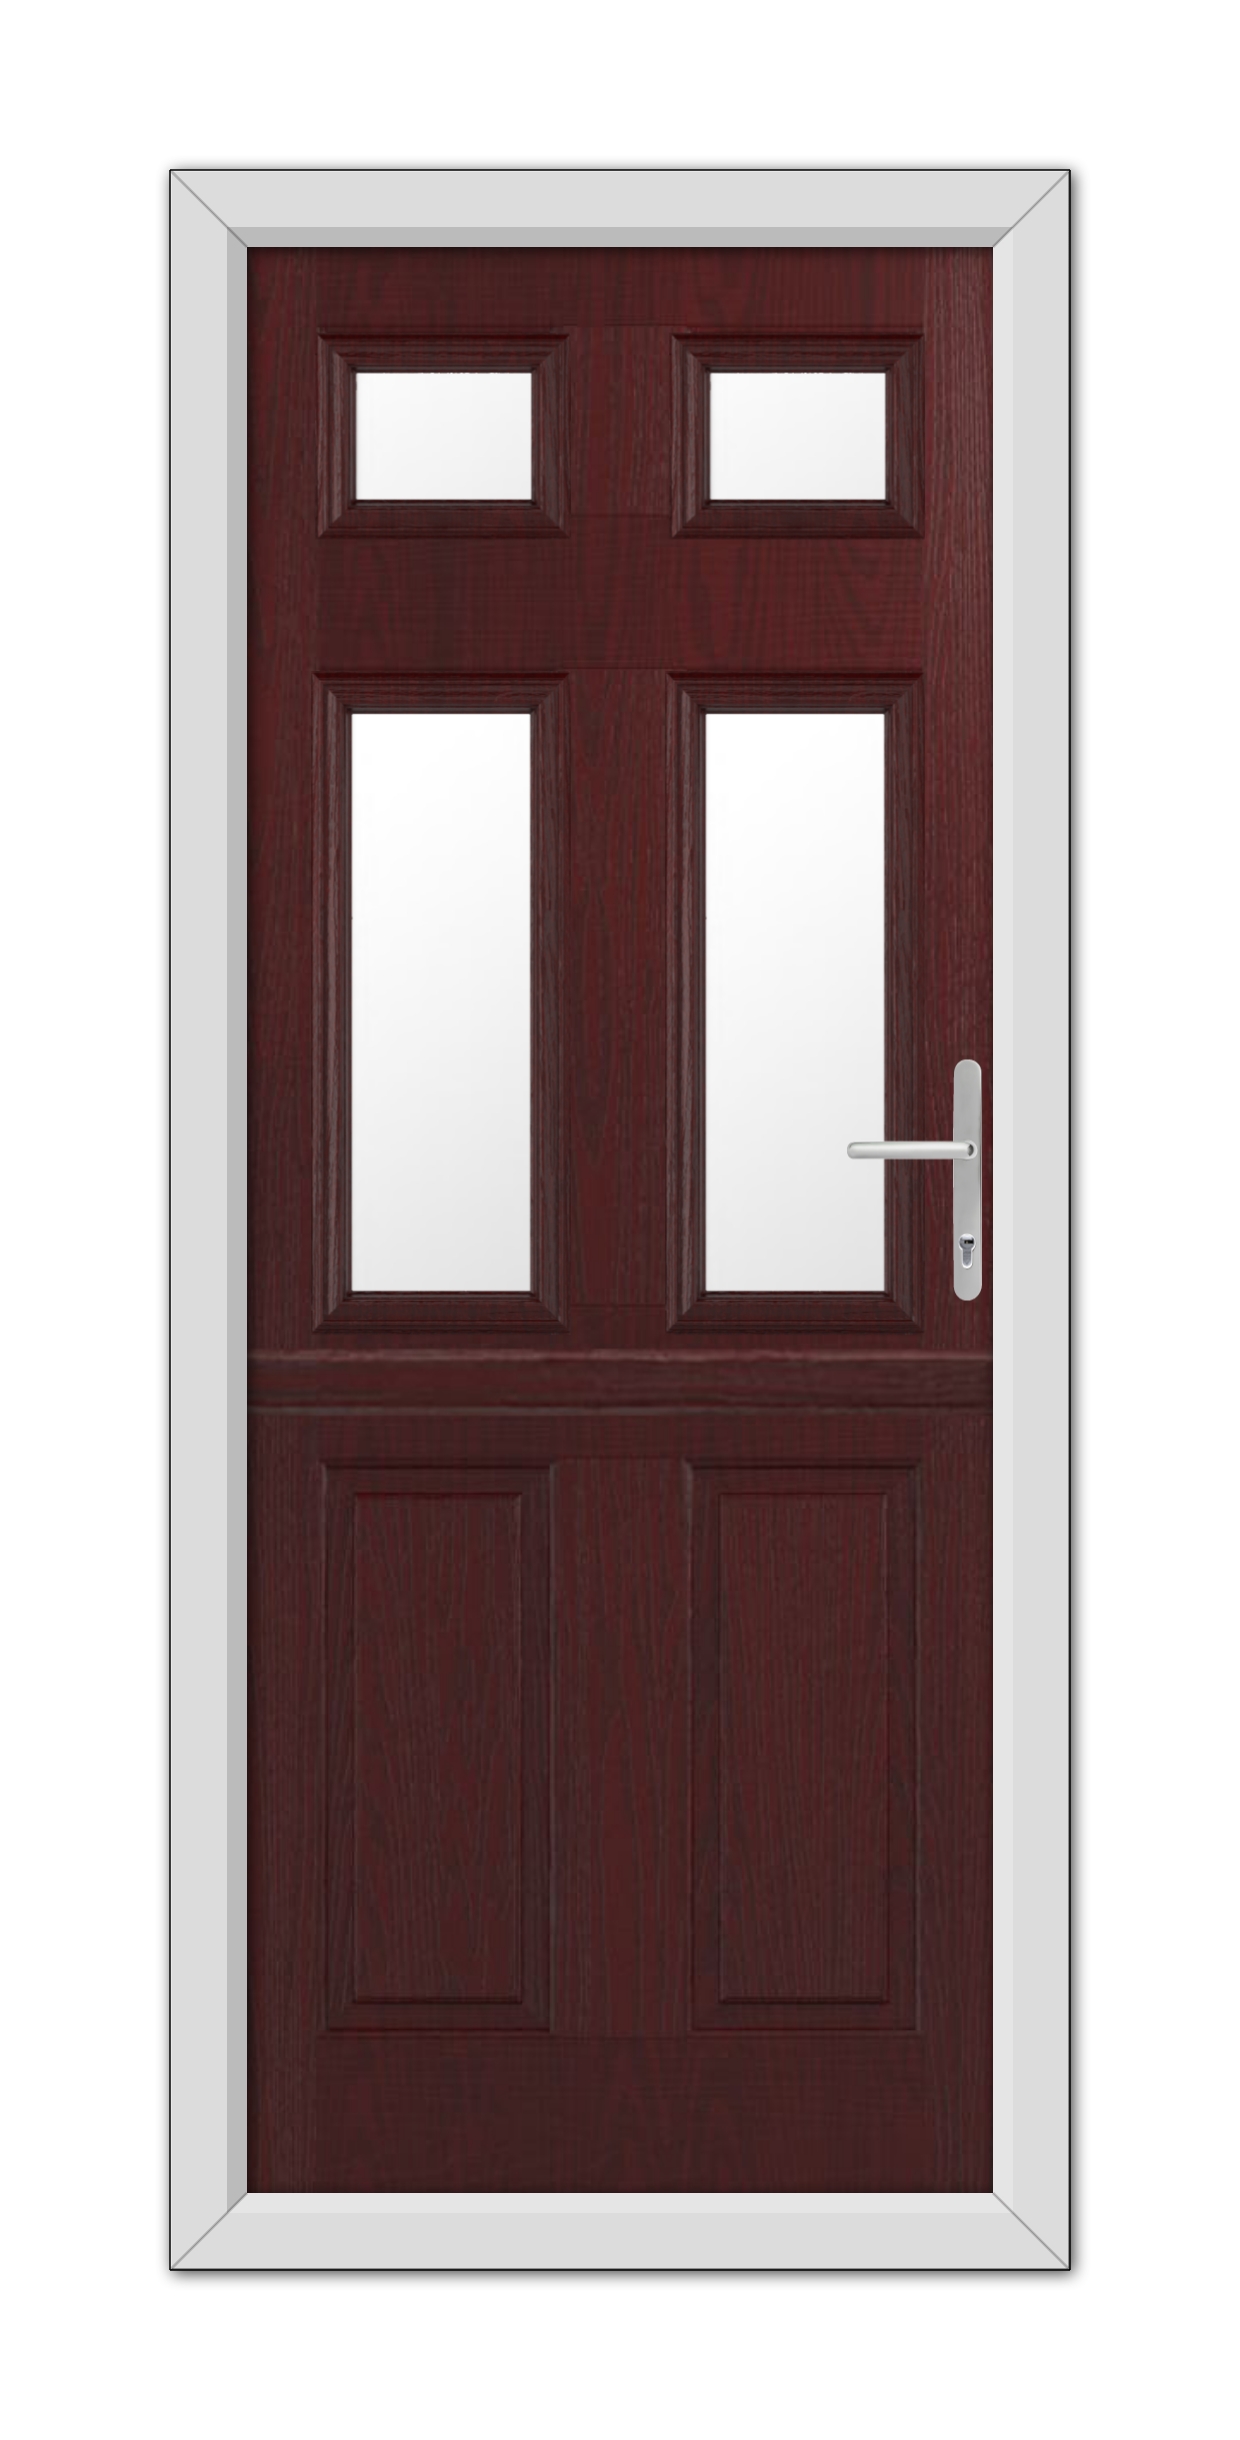 A modern closed Rosewood Middleton Glazed 4 Stable Composite Door 48mm Timber Core with a white frame, featuring upper glass panels and a metal handle.